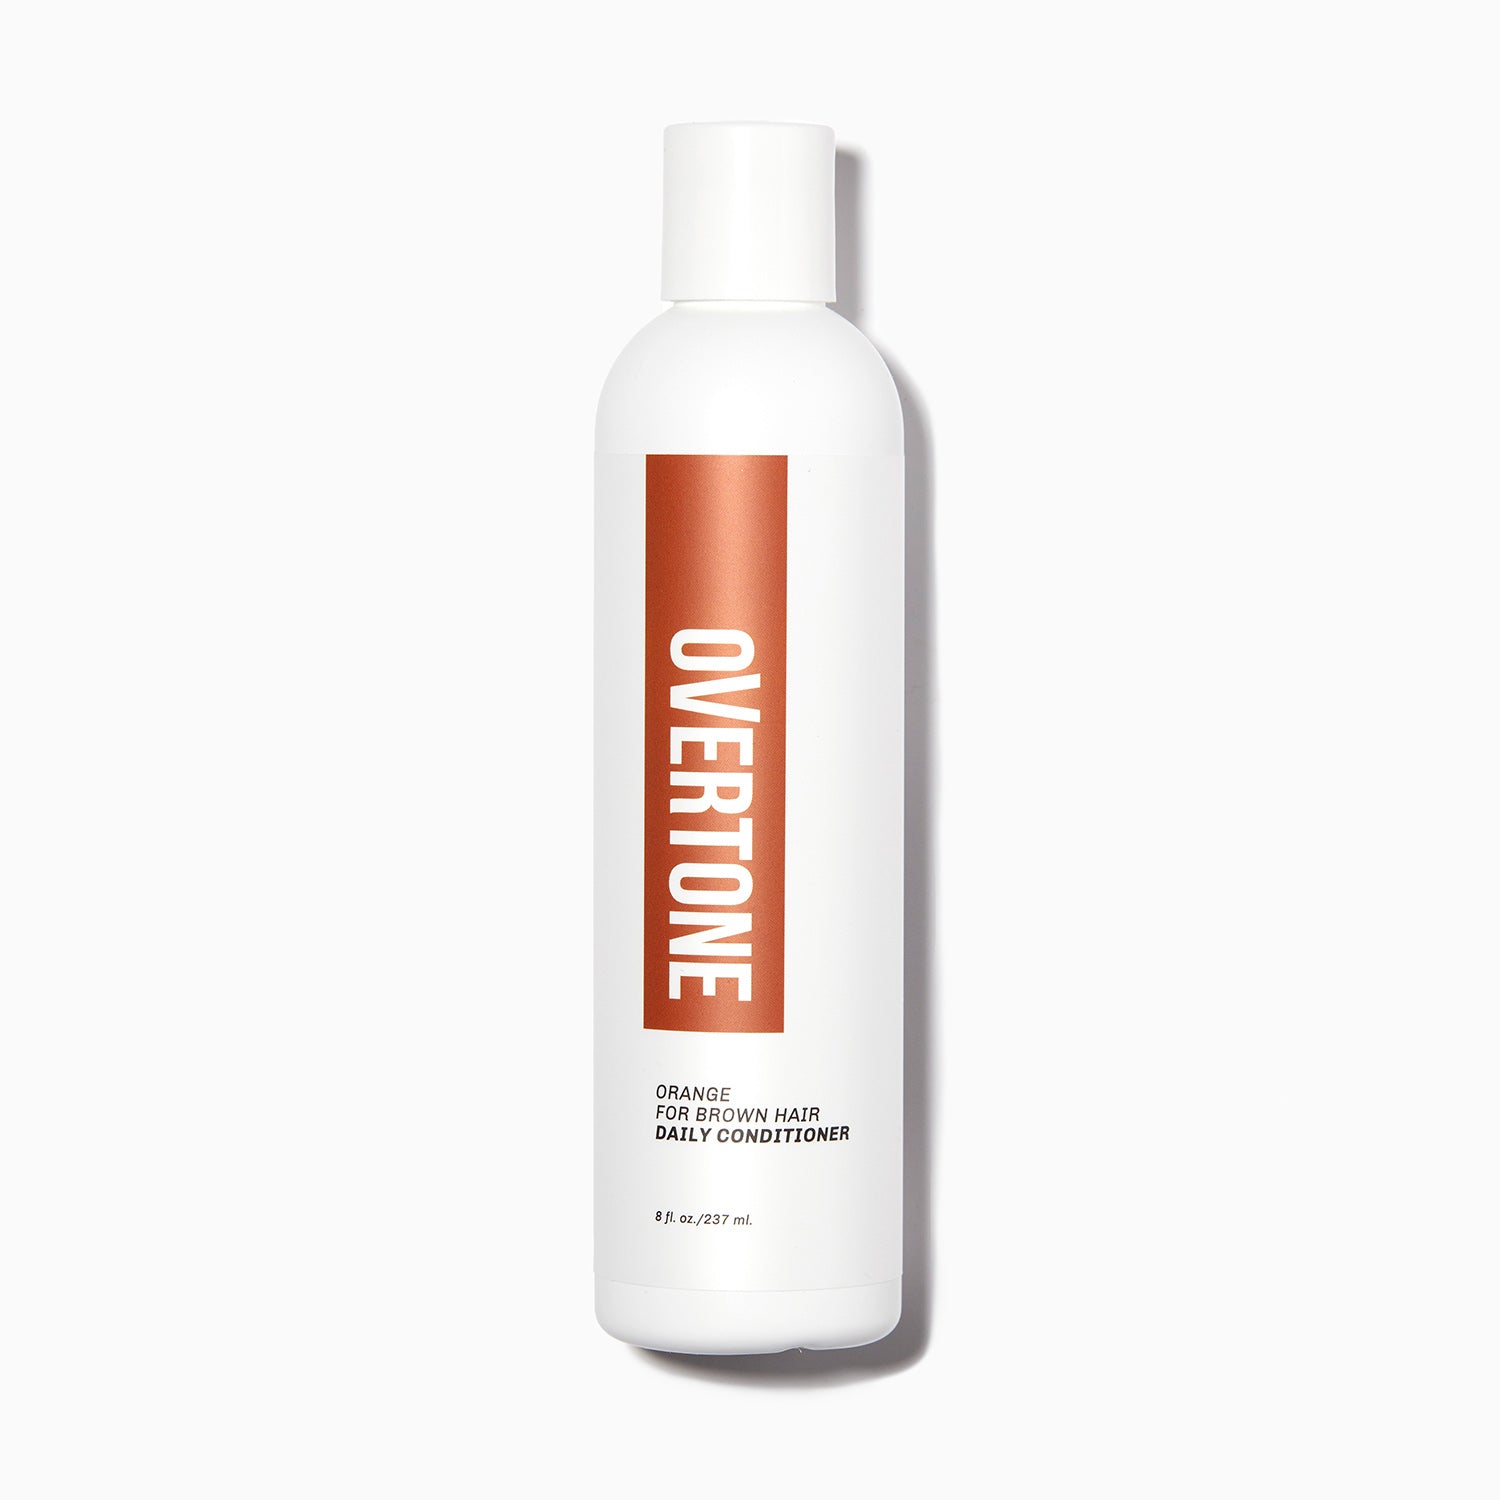 oVertone Orange For Brown Hair Daily Conditioner